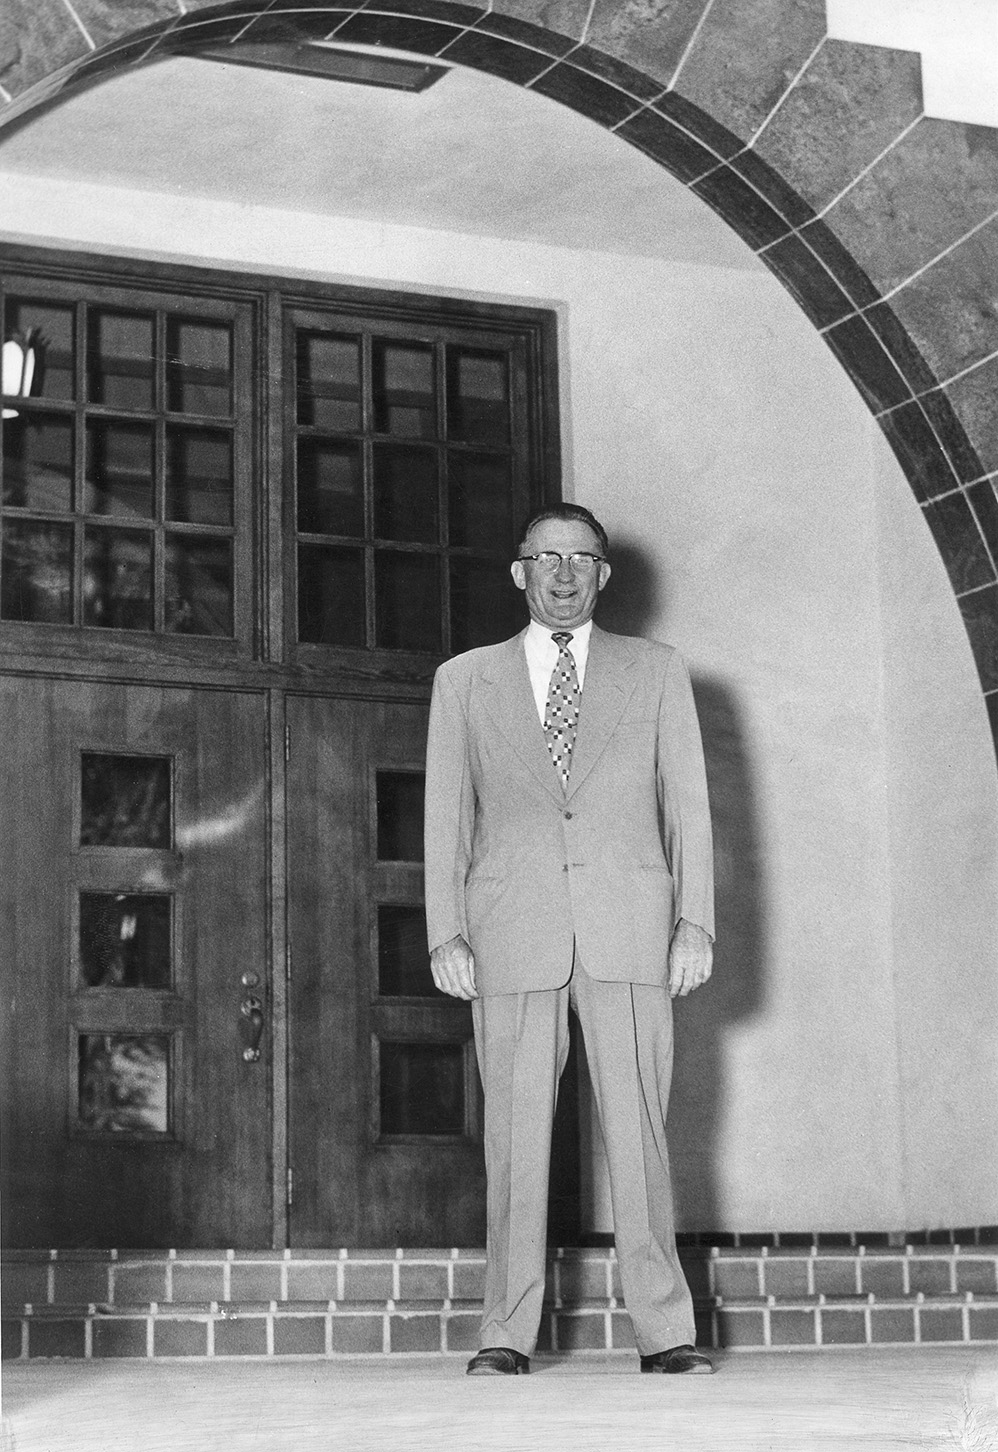 black and white portrait of a man, Roger Corbett, standing in an archway